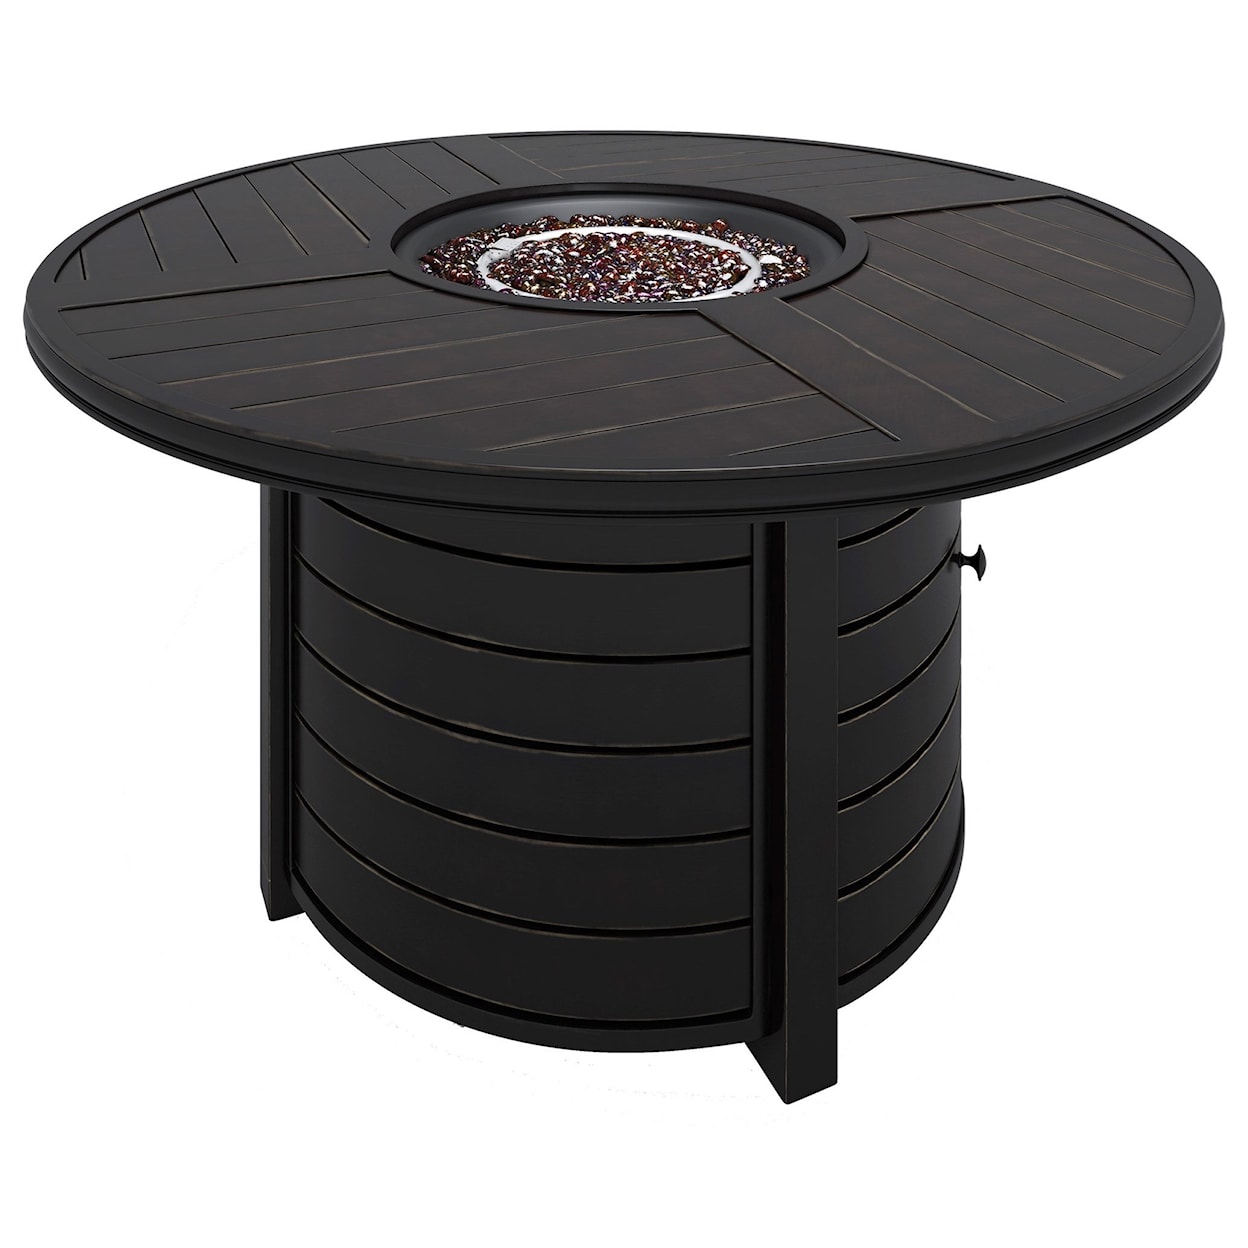 Signature Design by Ashley Castle Island Round Fire Pit Table